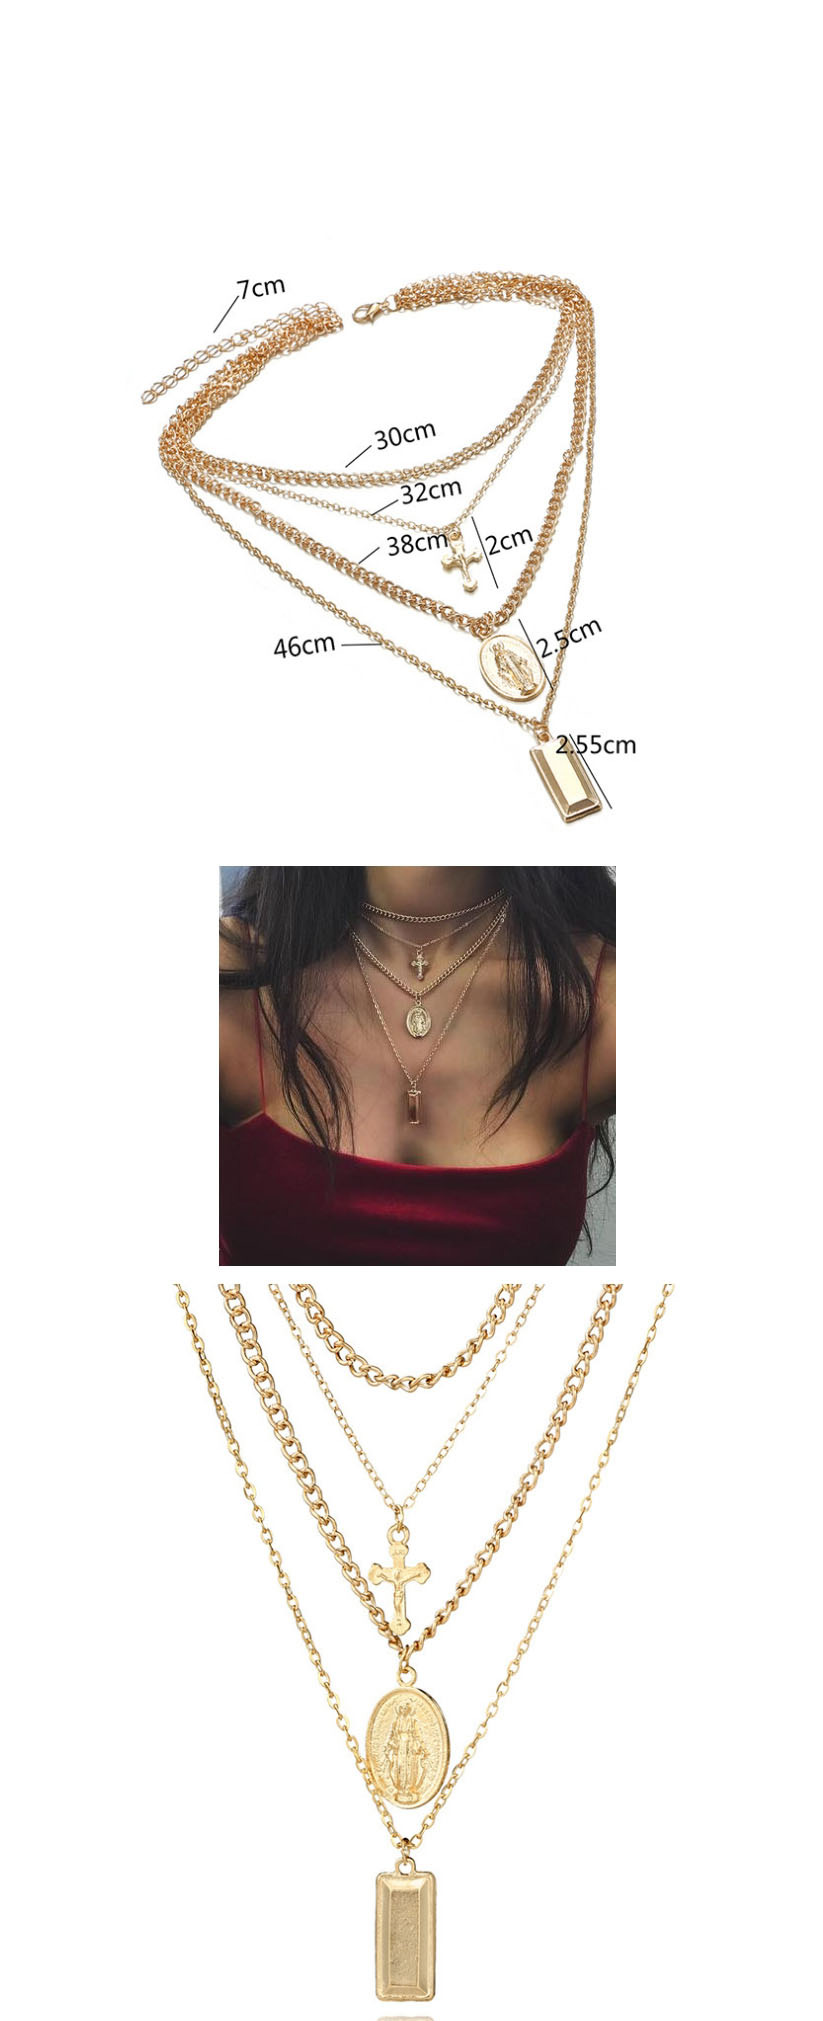 Fashion Golden Cross Disc Star Bead Multilayer Necklace,Multi Strand Necklaces